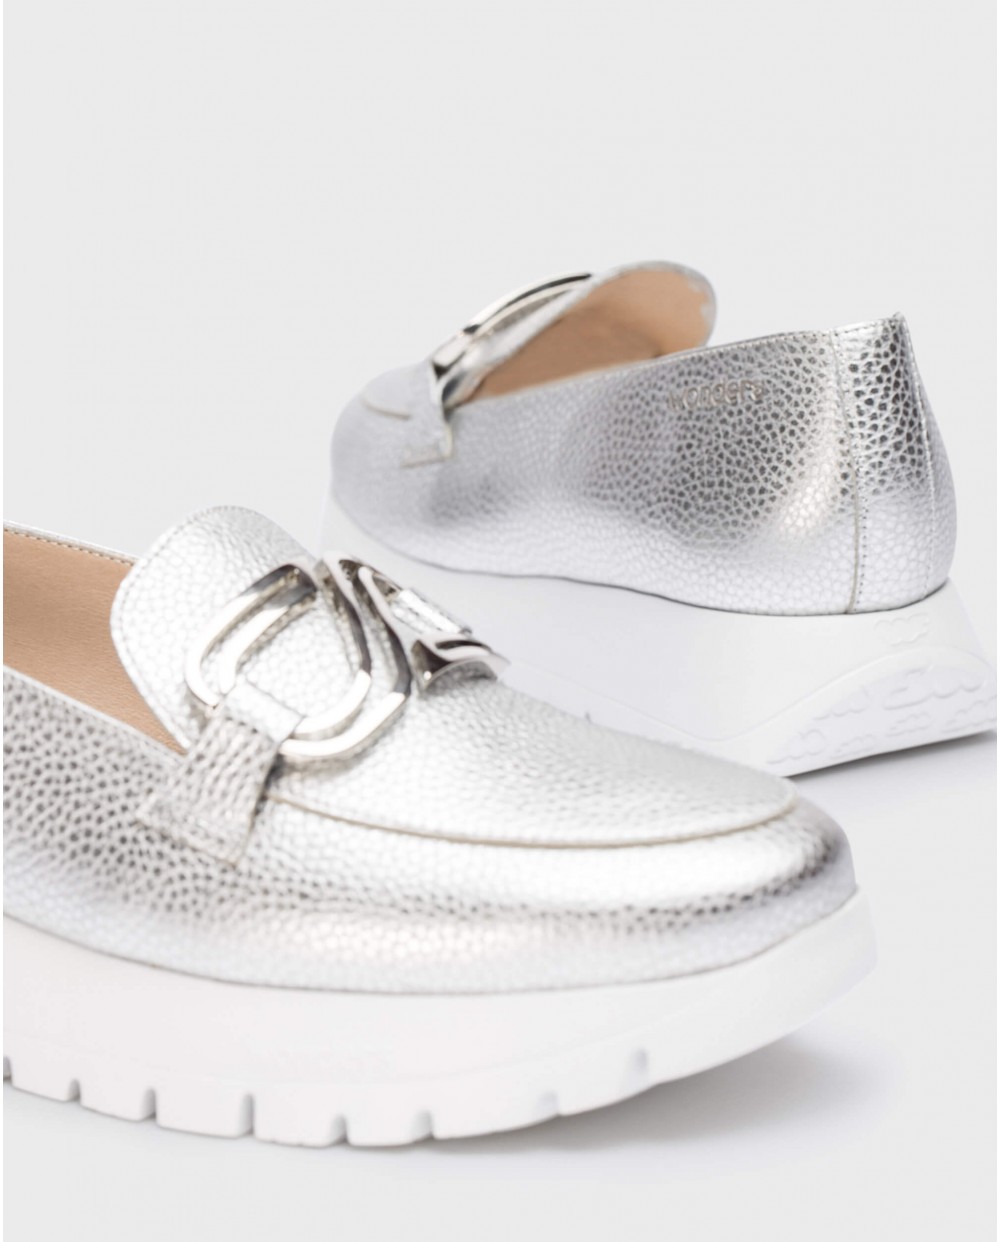 Silver Sidney Moccasin